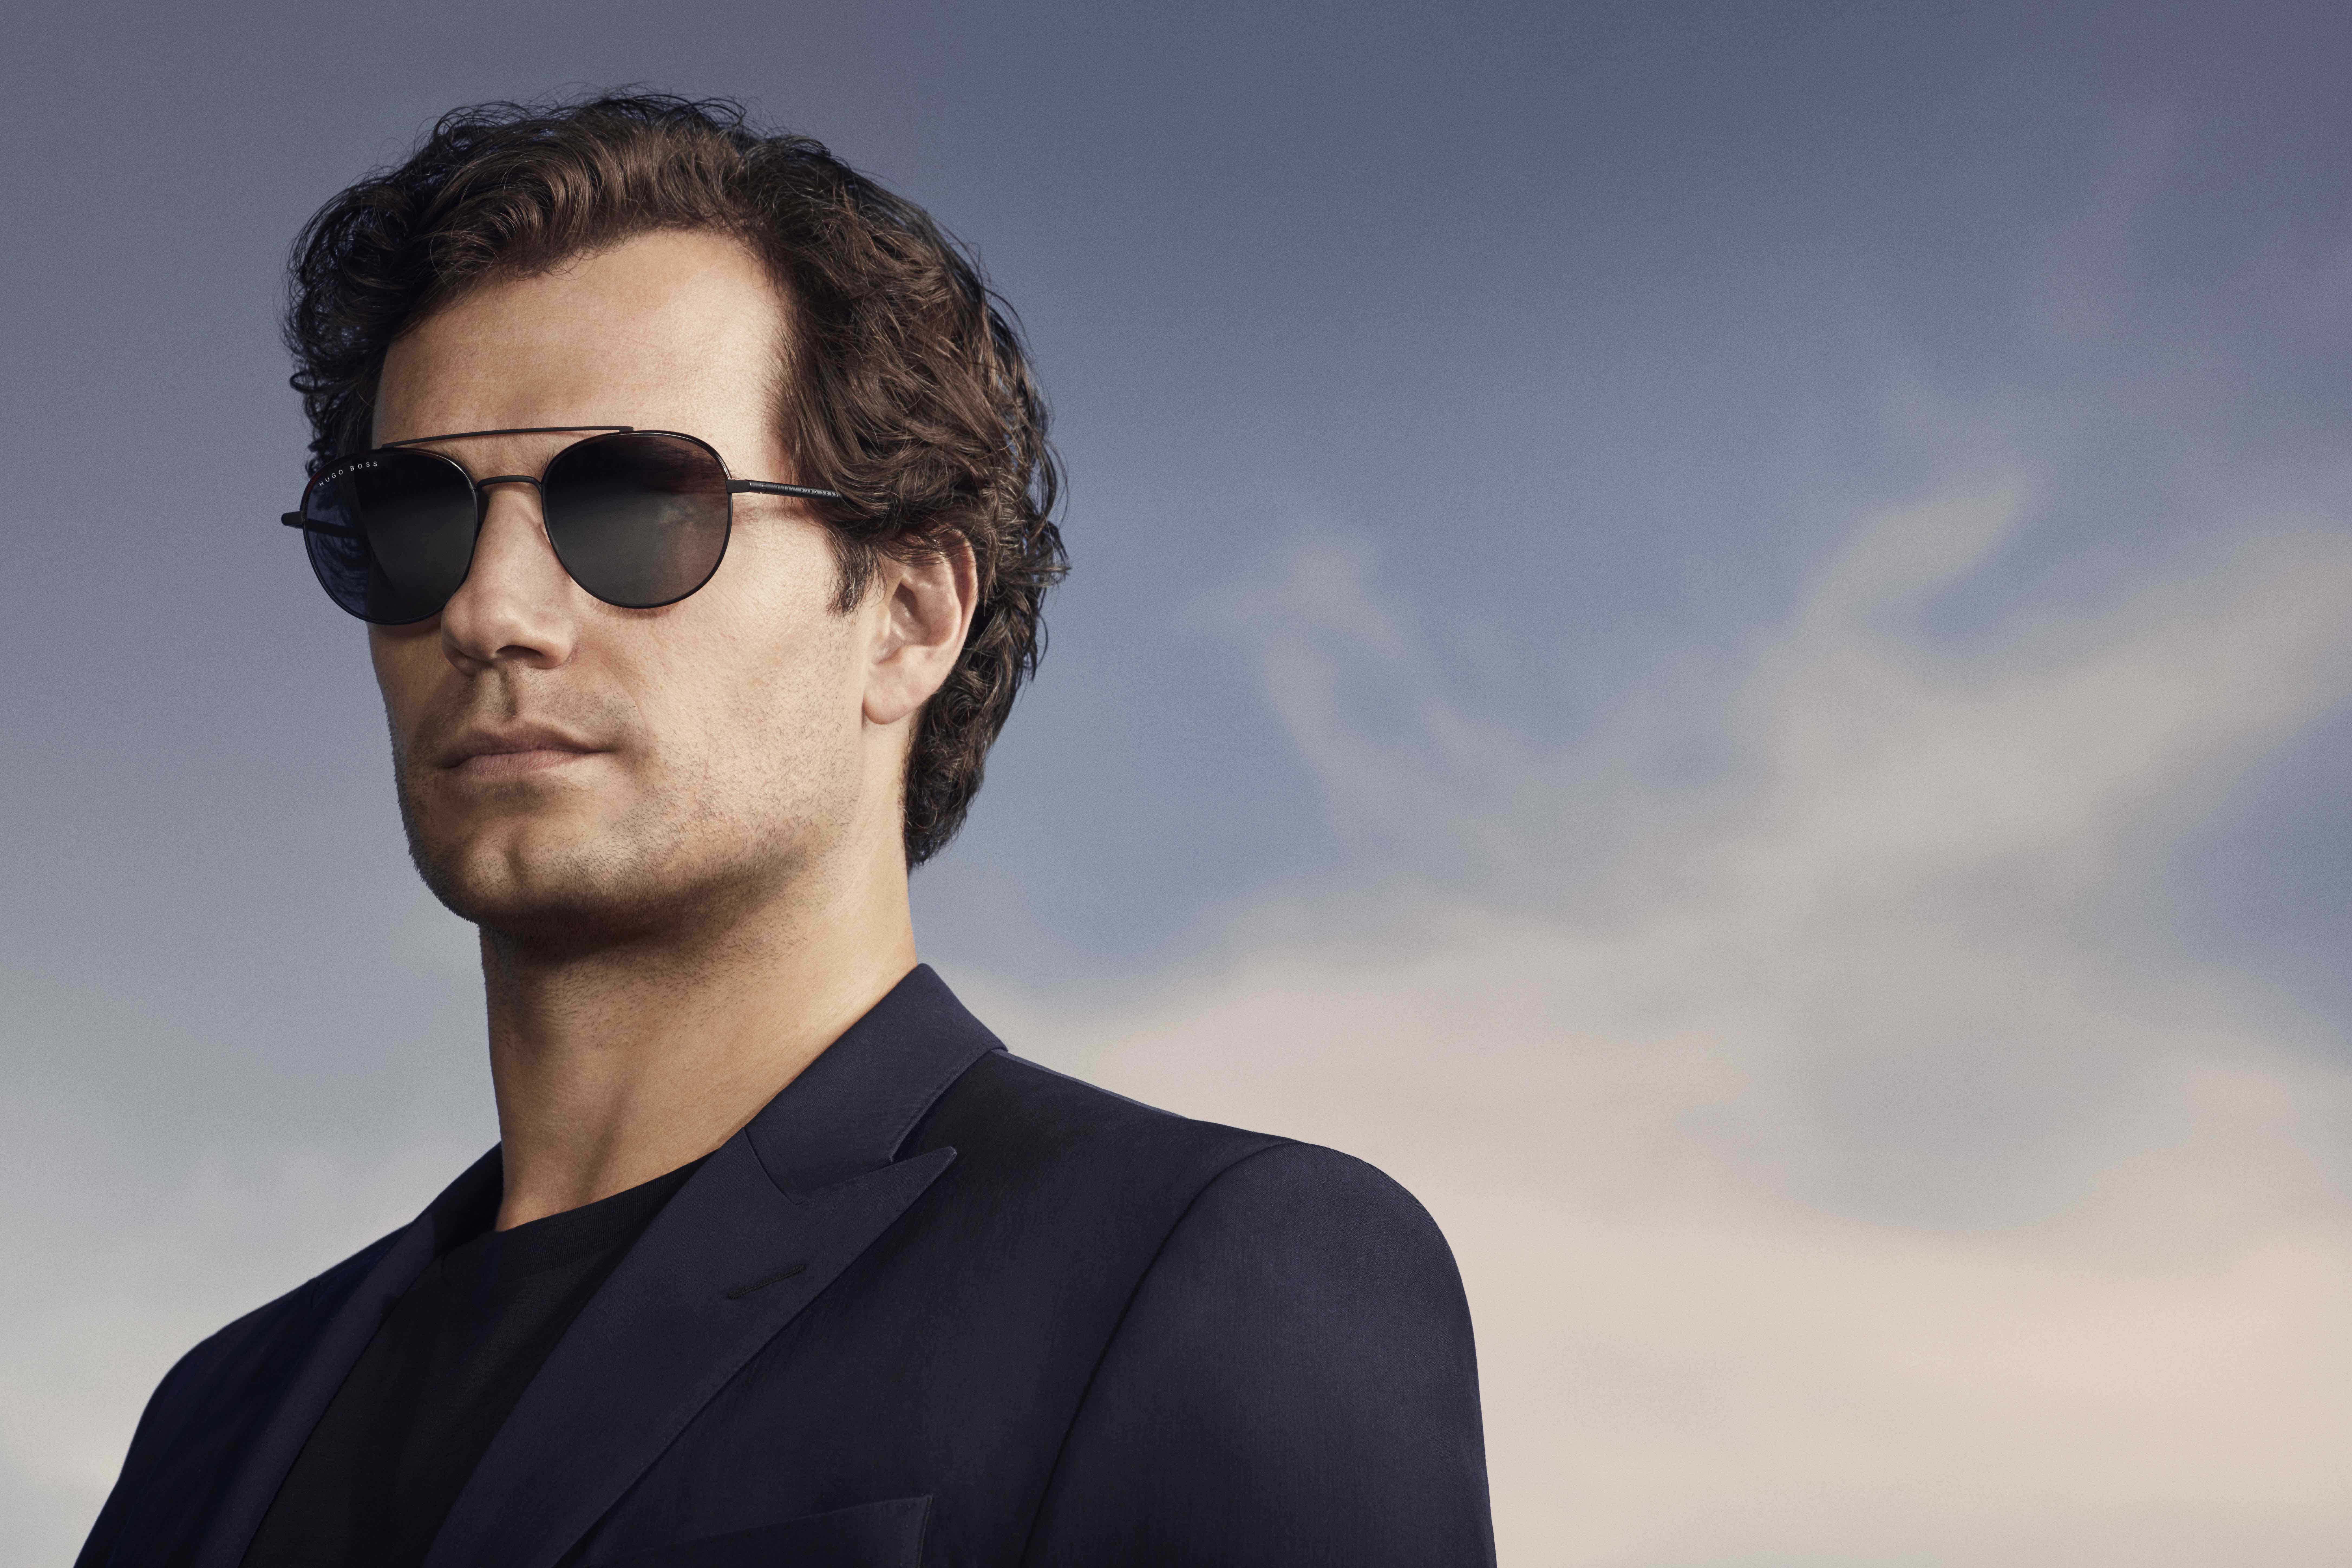 Global Ambassador Henry Cavill Springs Into Action With The Latest BOSS Eyewear Campaign